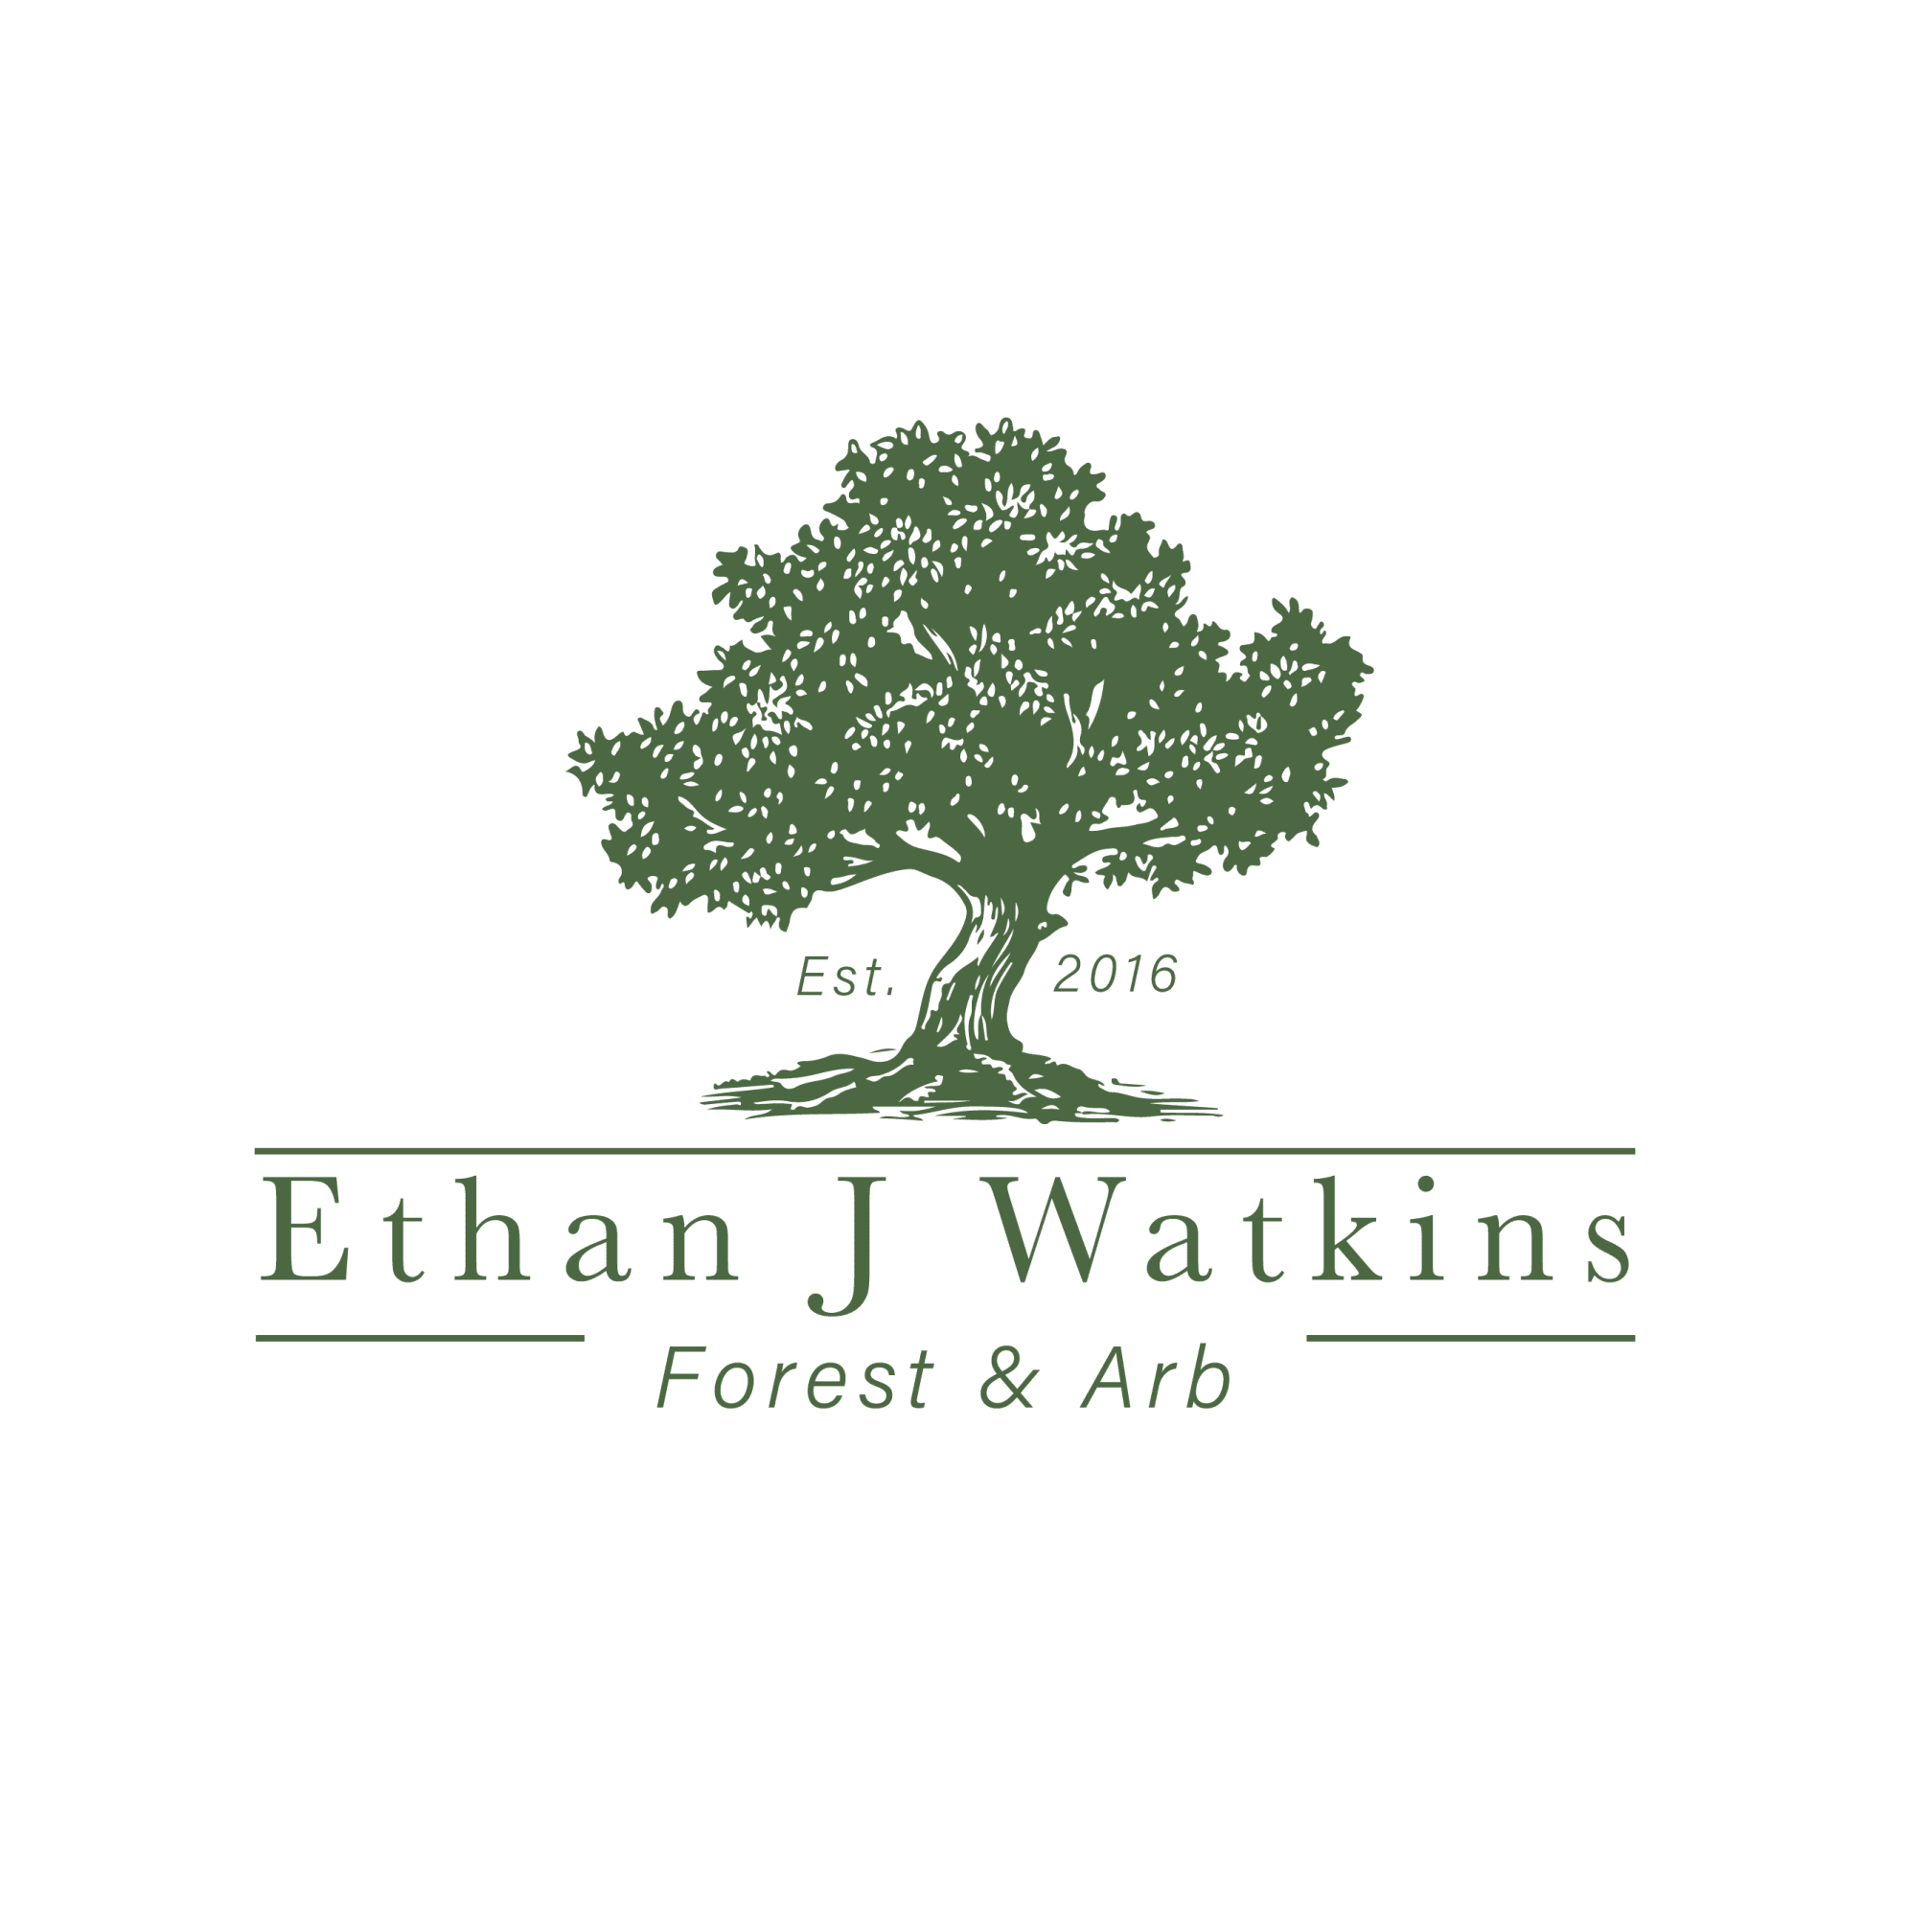 Ethan J Watkins Forest & Arb - Hereford, Herefordshire HR2 0AA - 07891 269378 | ShowMeLocal.com